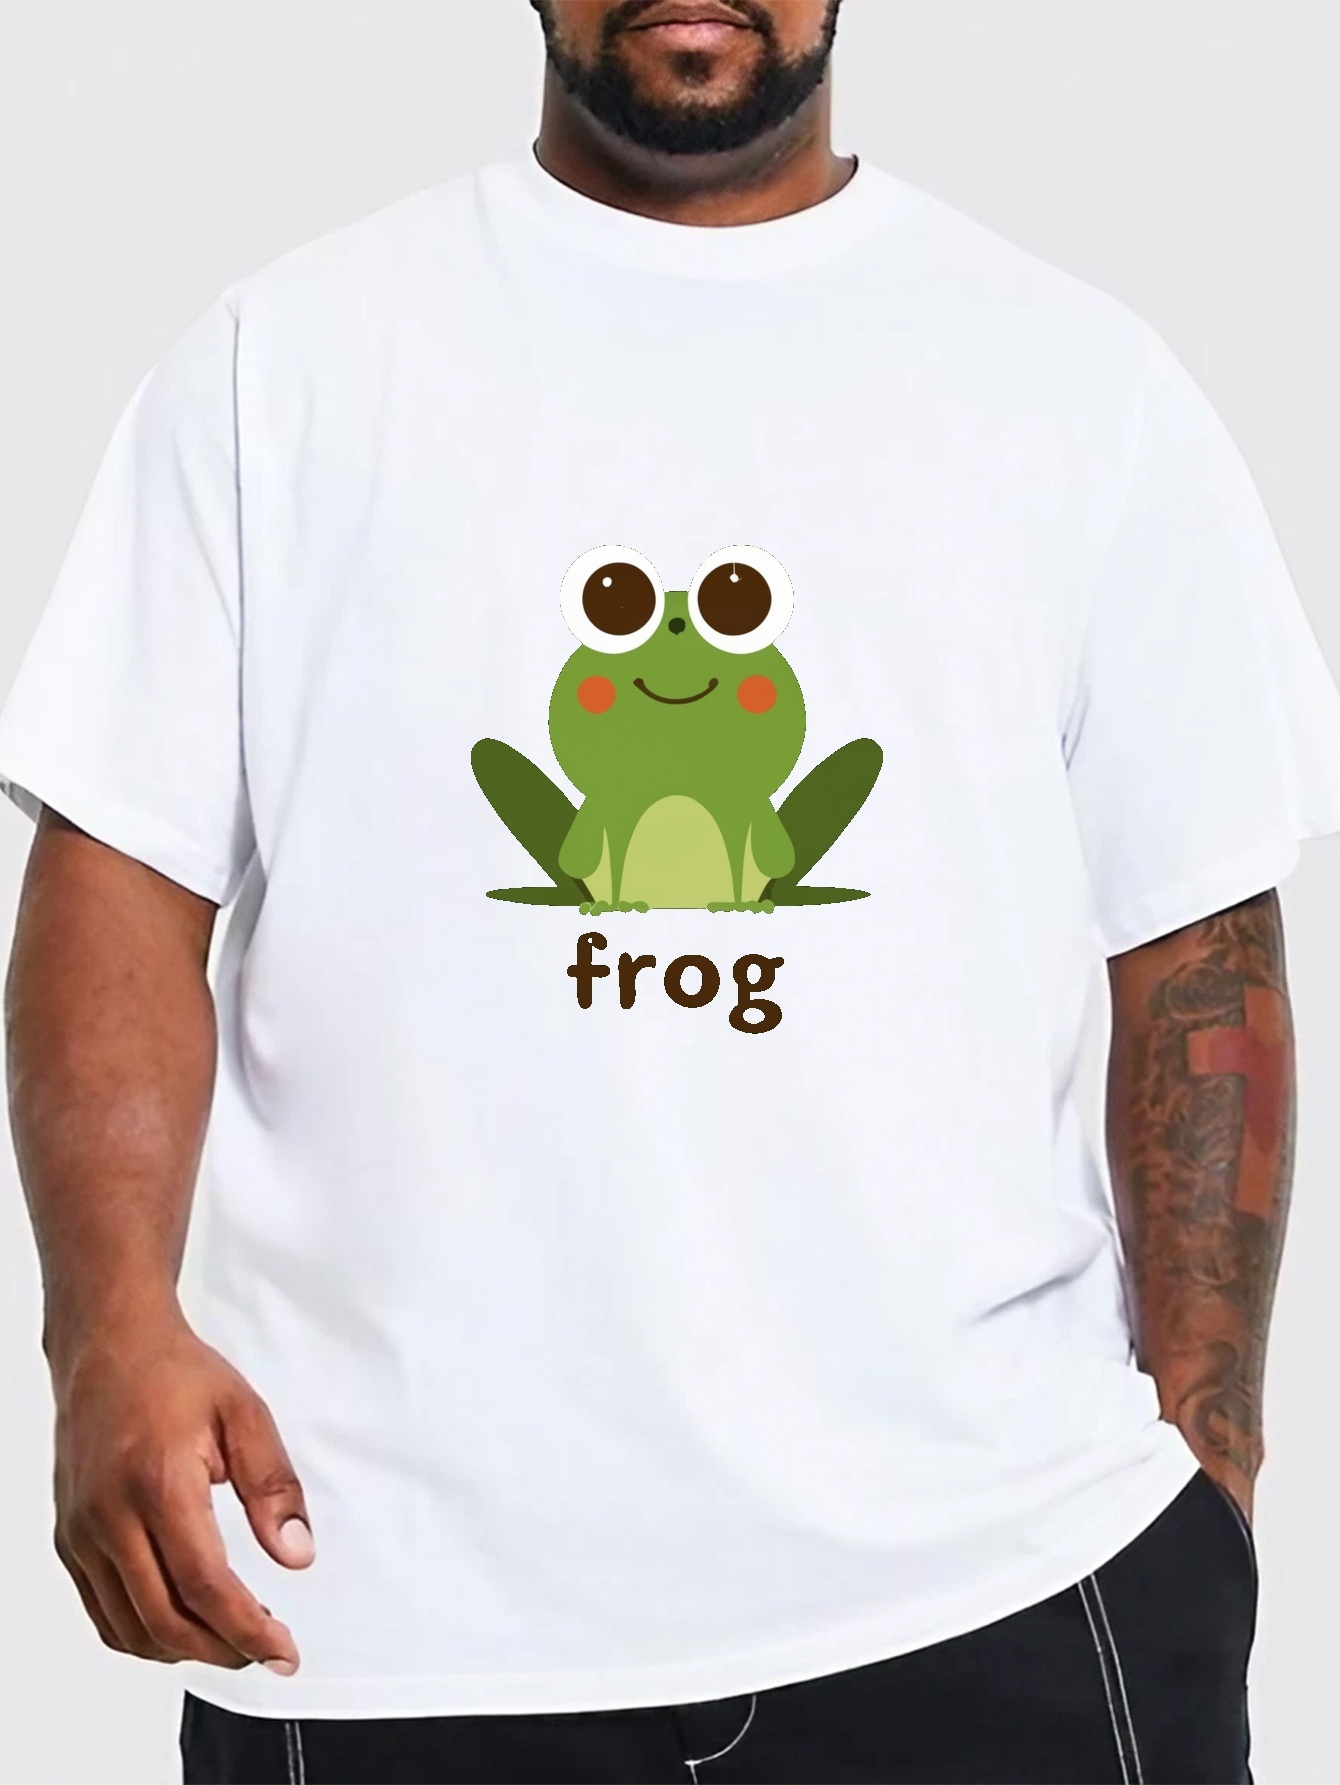 Plus Size Men's T-Shirt, Blouses, Cartoon Frog Graphic Print Tees for Summer, Men's Clothing,Casual,Temu